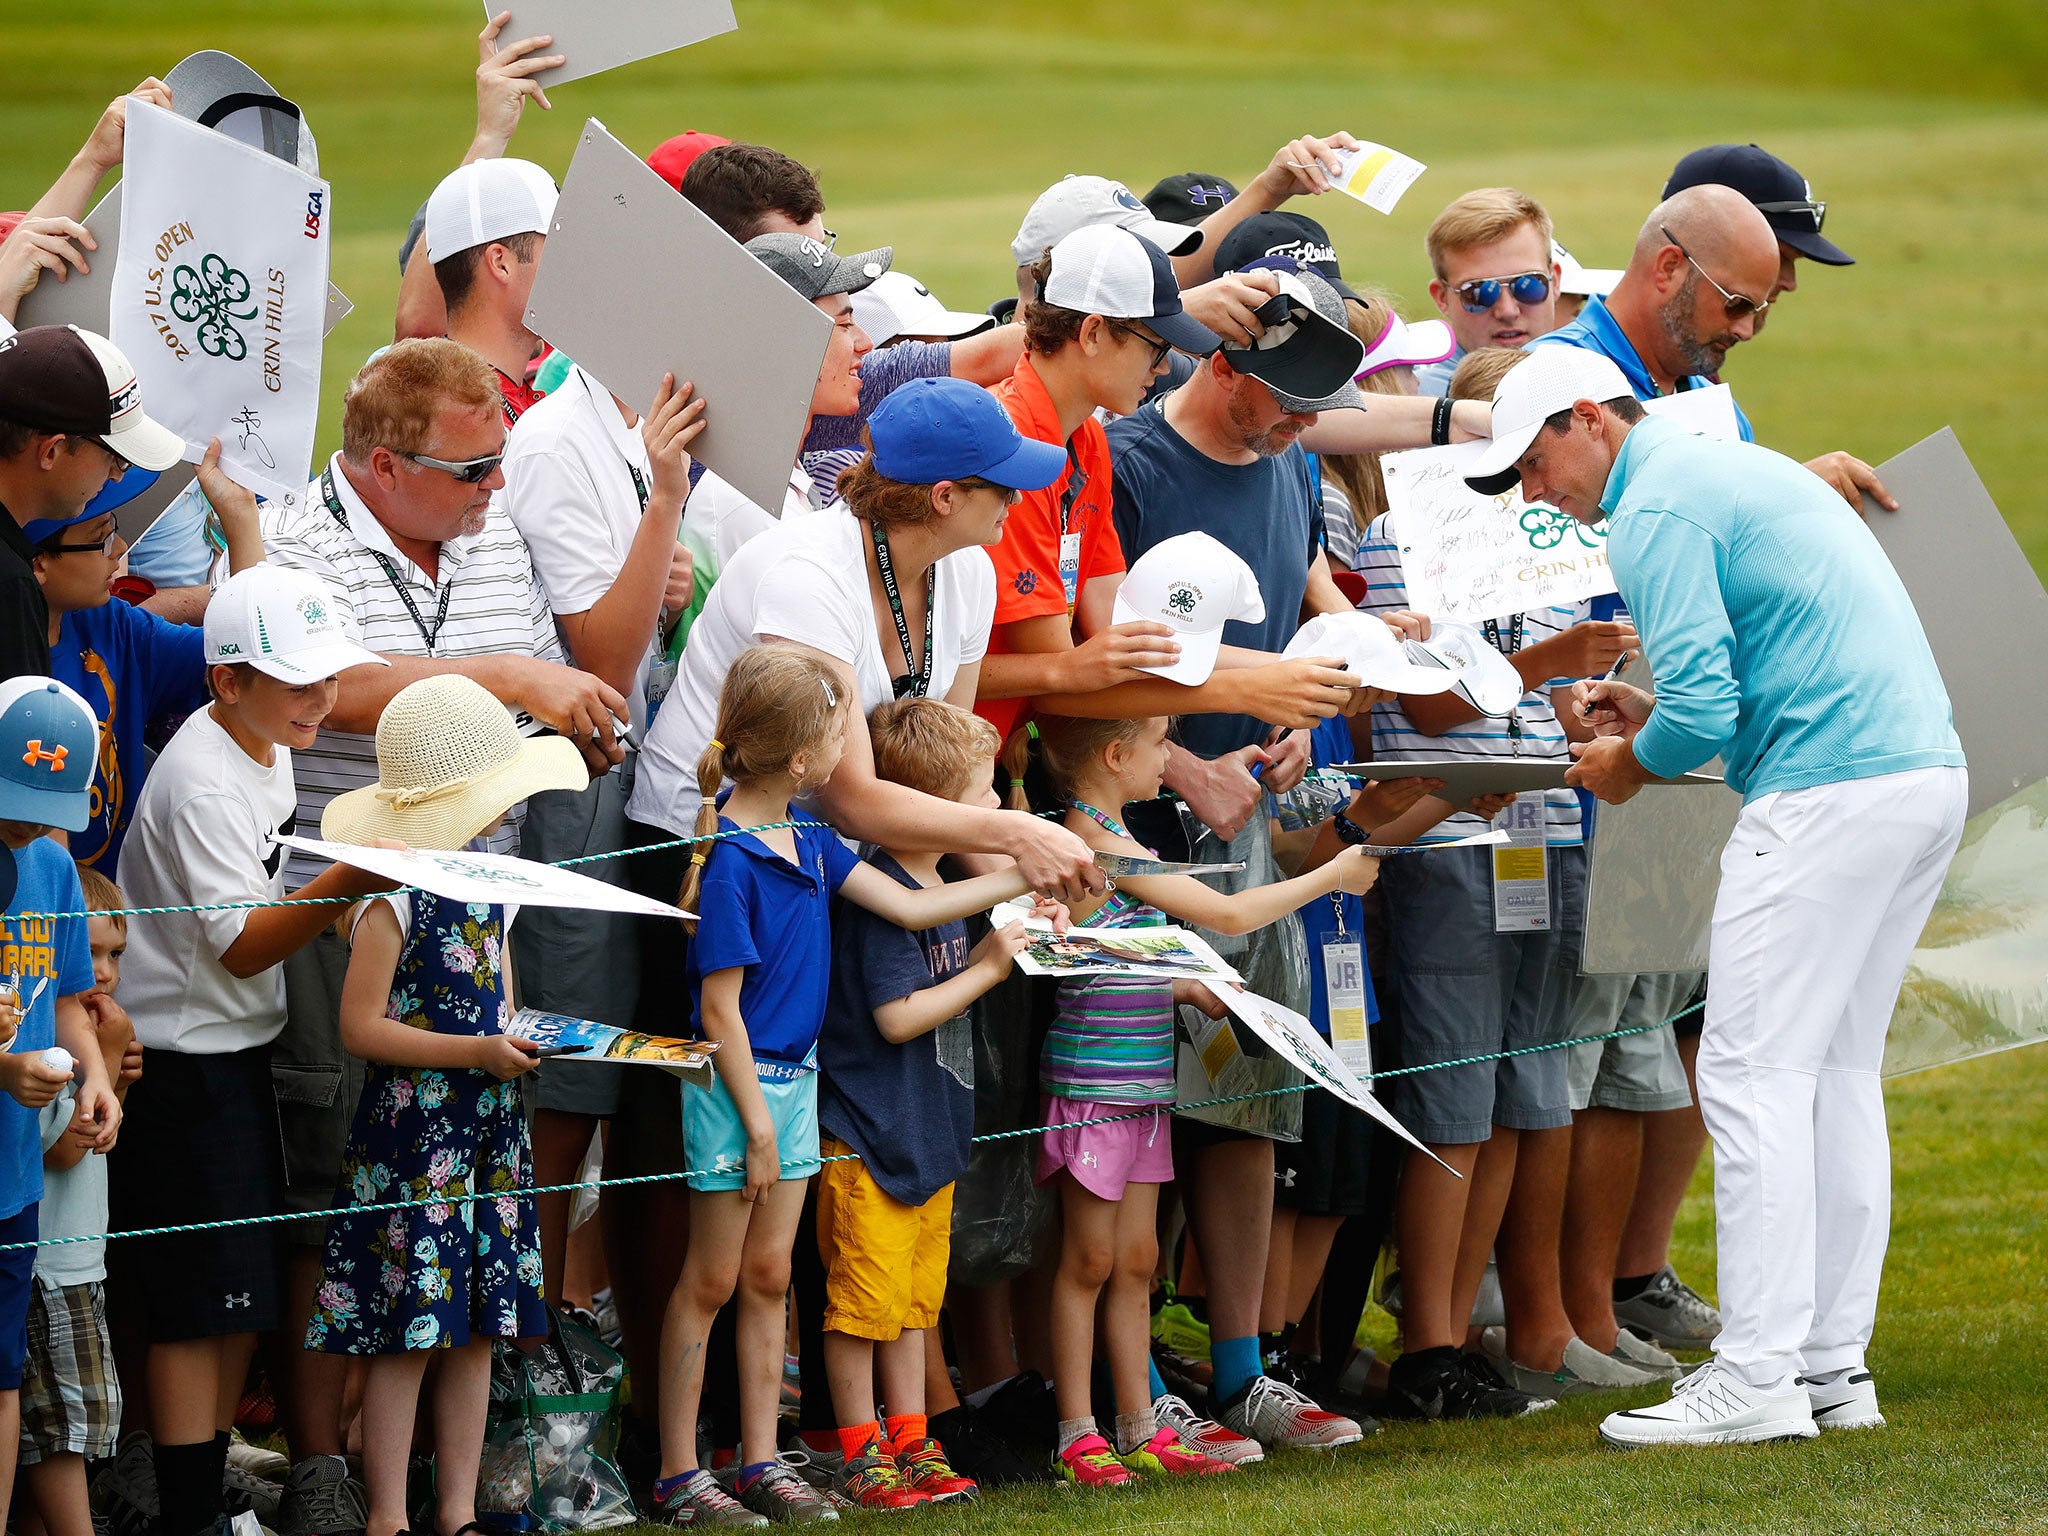 Mcilroy greets fans during a practice session